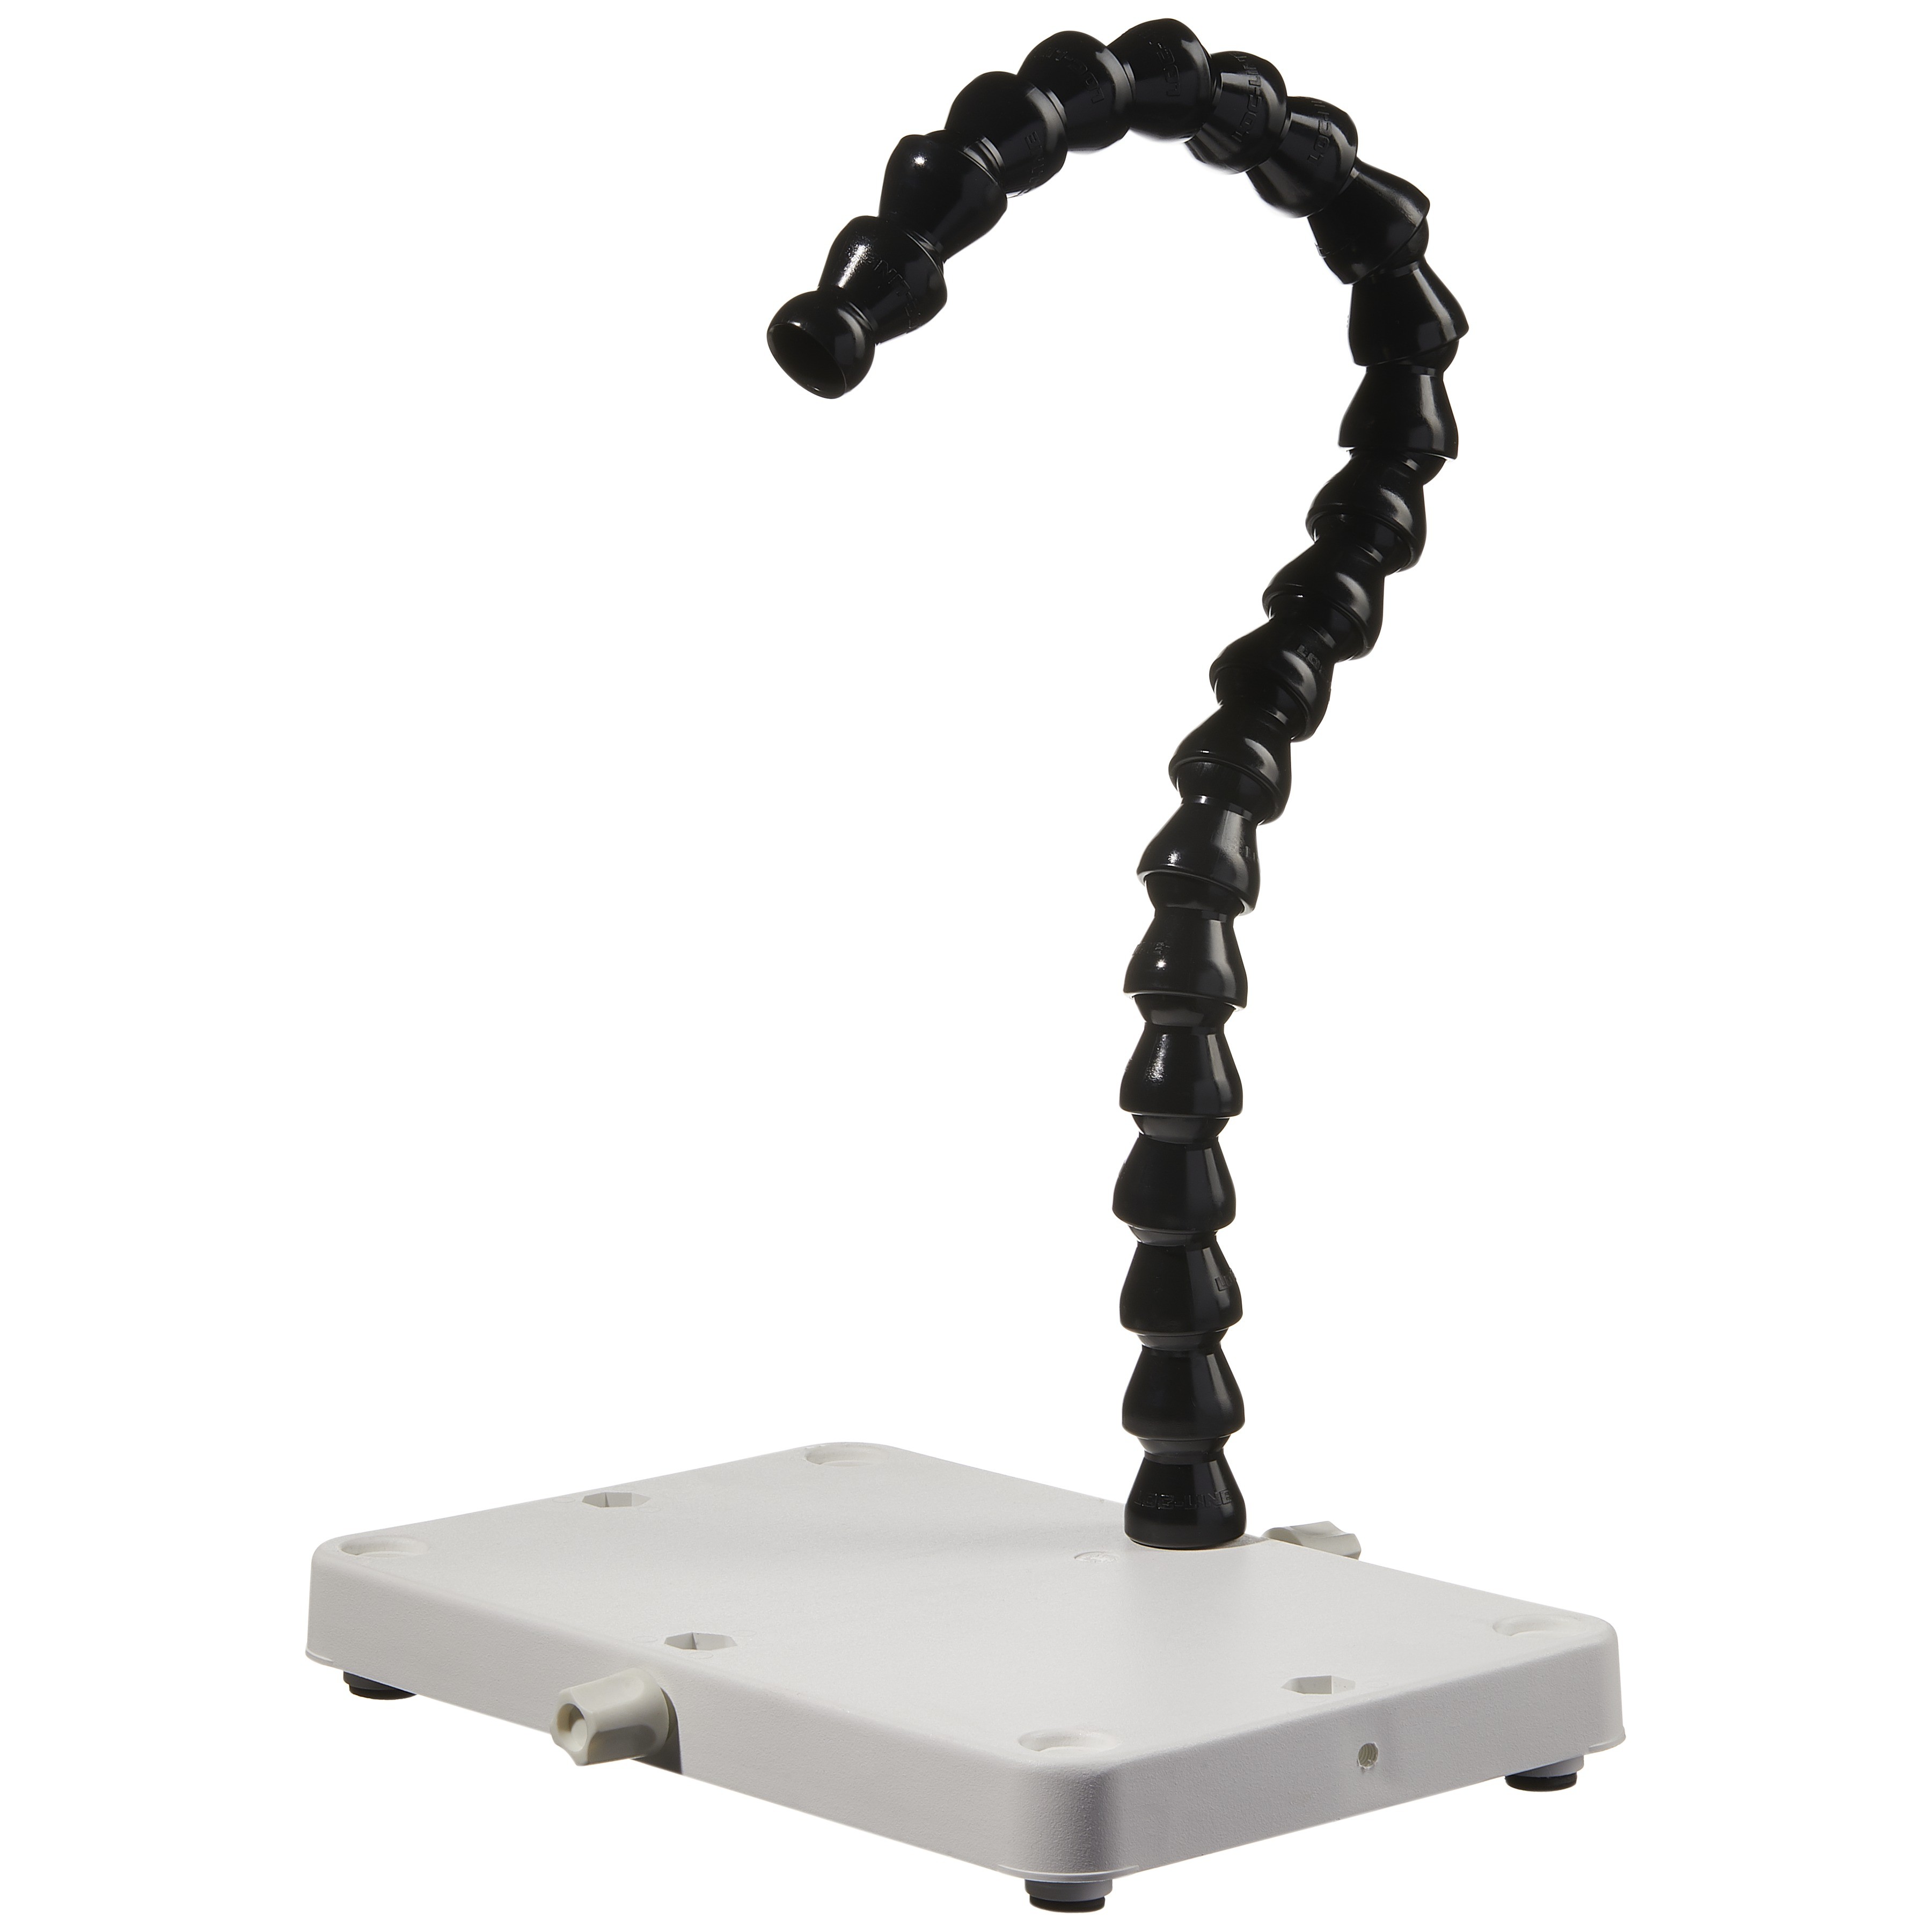 SP Bel-Art Multi-Purpose Flexible Arm Stand with Weighted Base